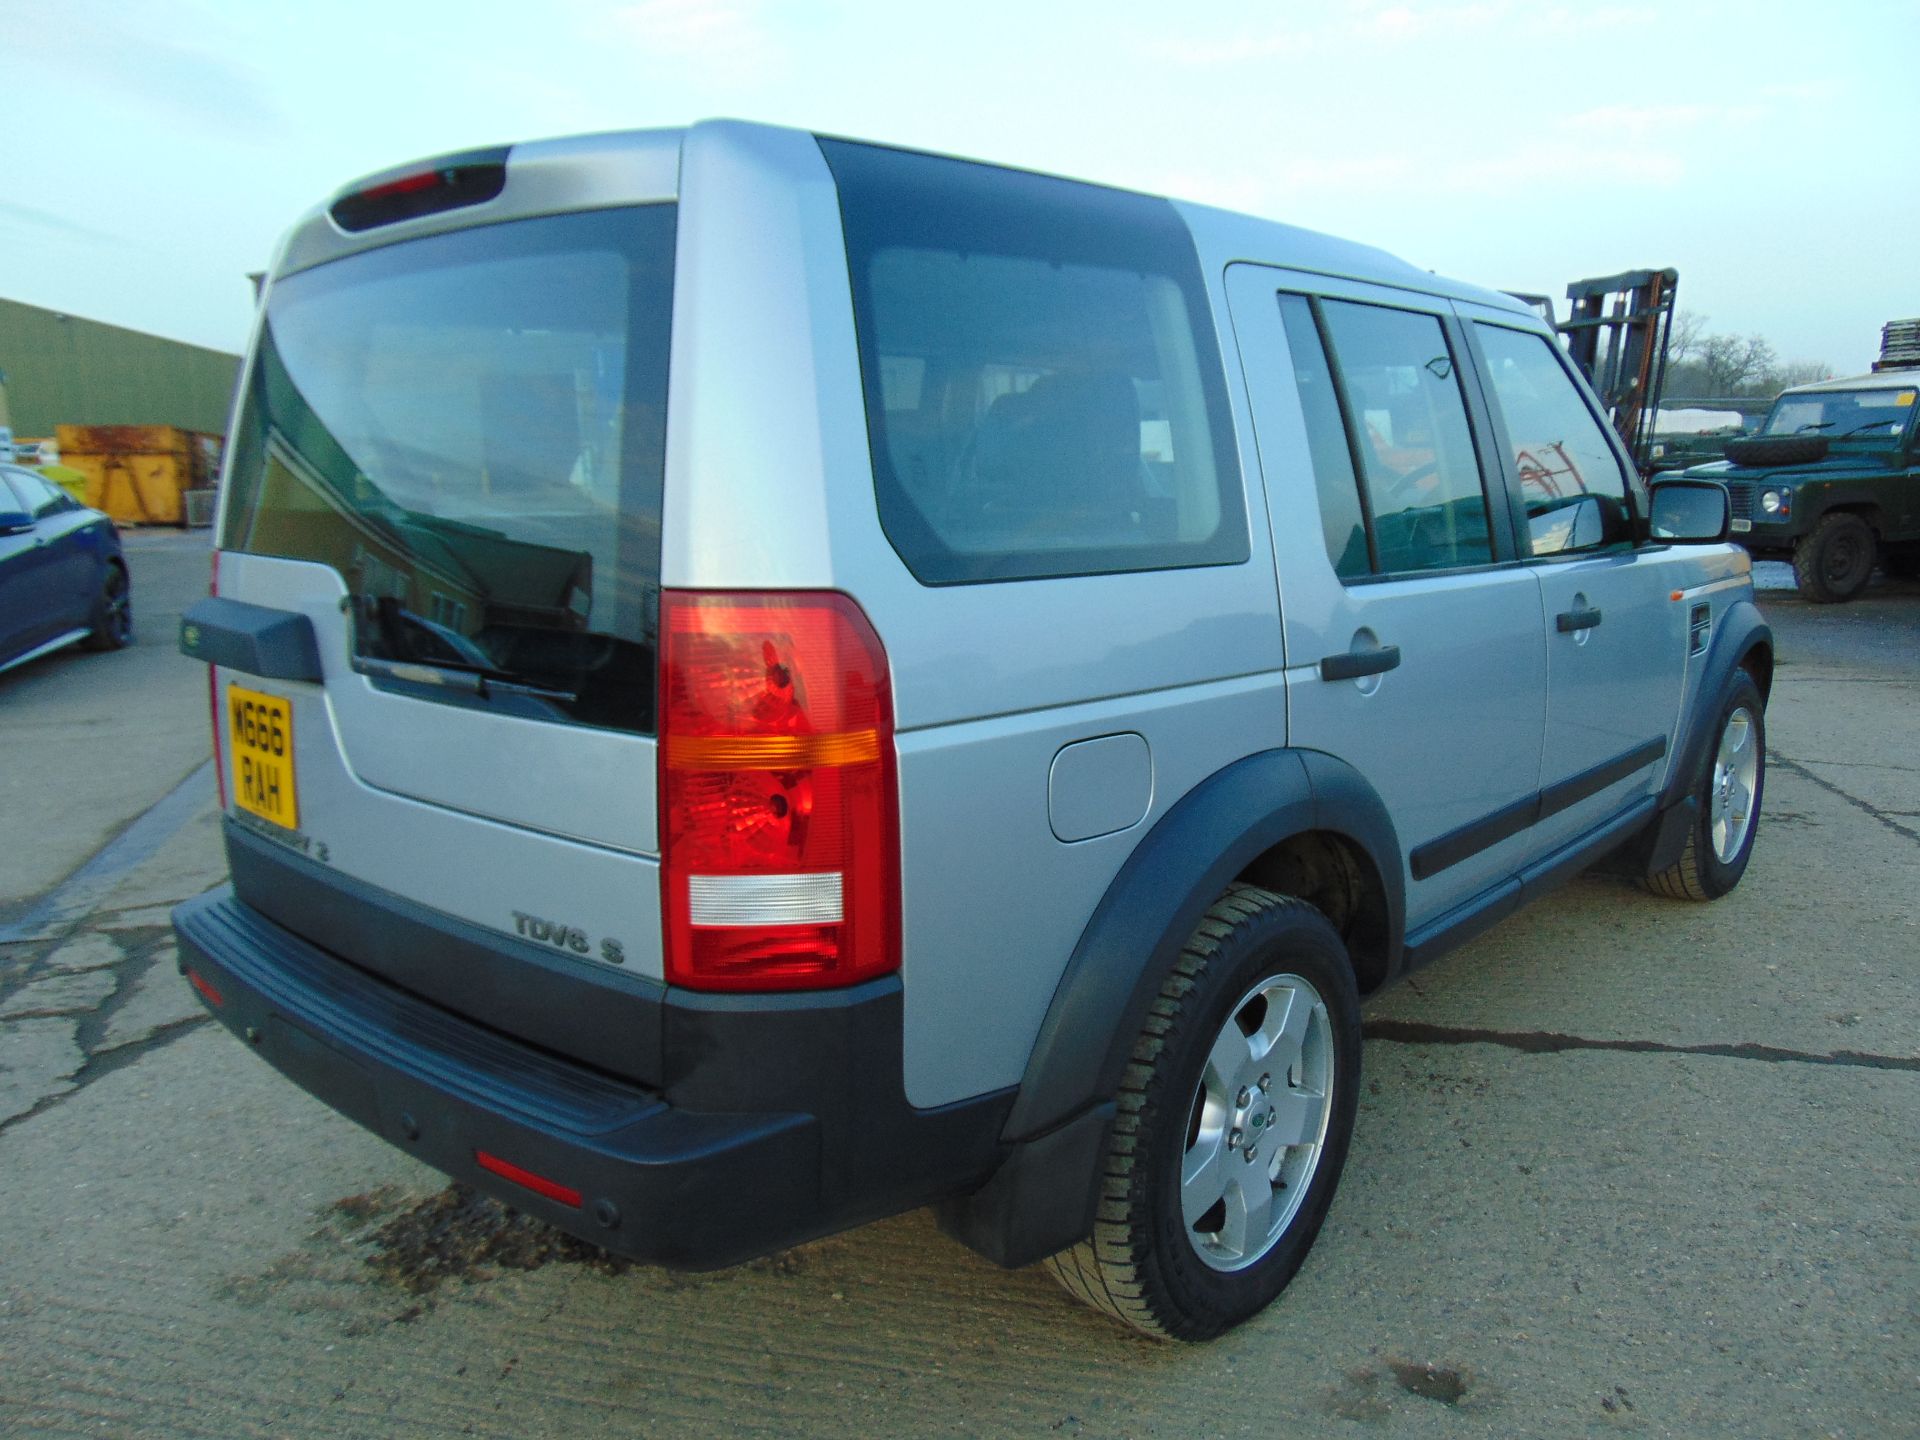 2006 Land Rover Discovery 3 2.7 TDV6 S Auto - Image 7 of 21